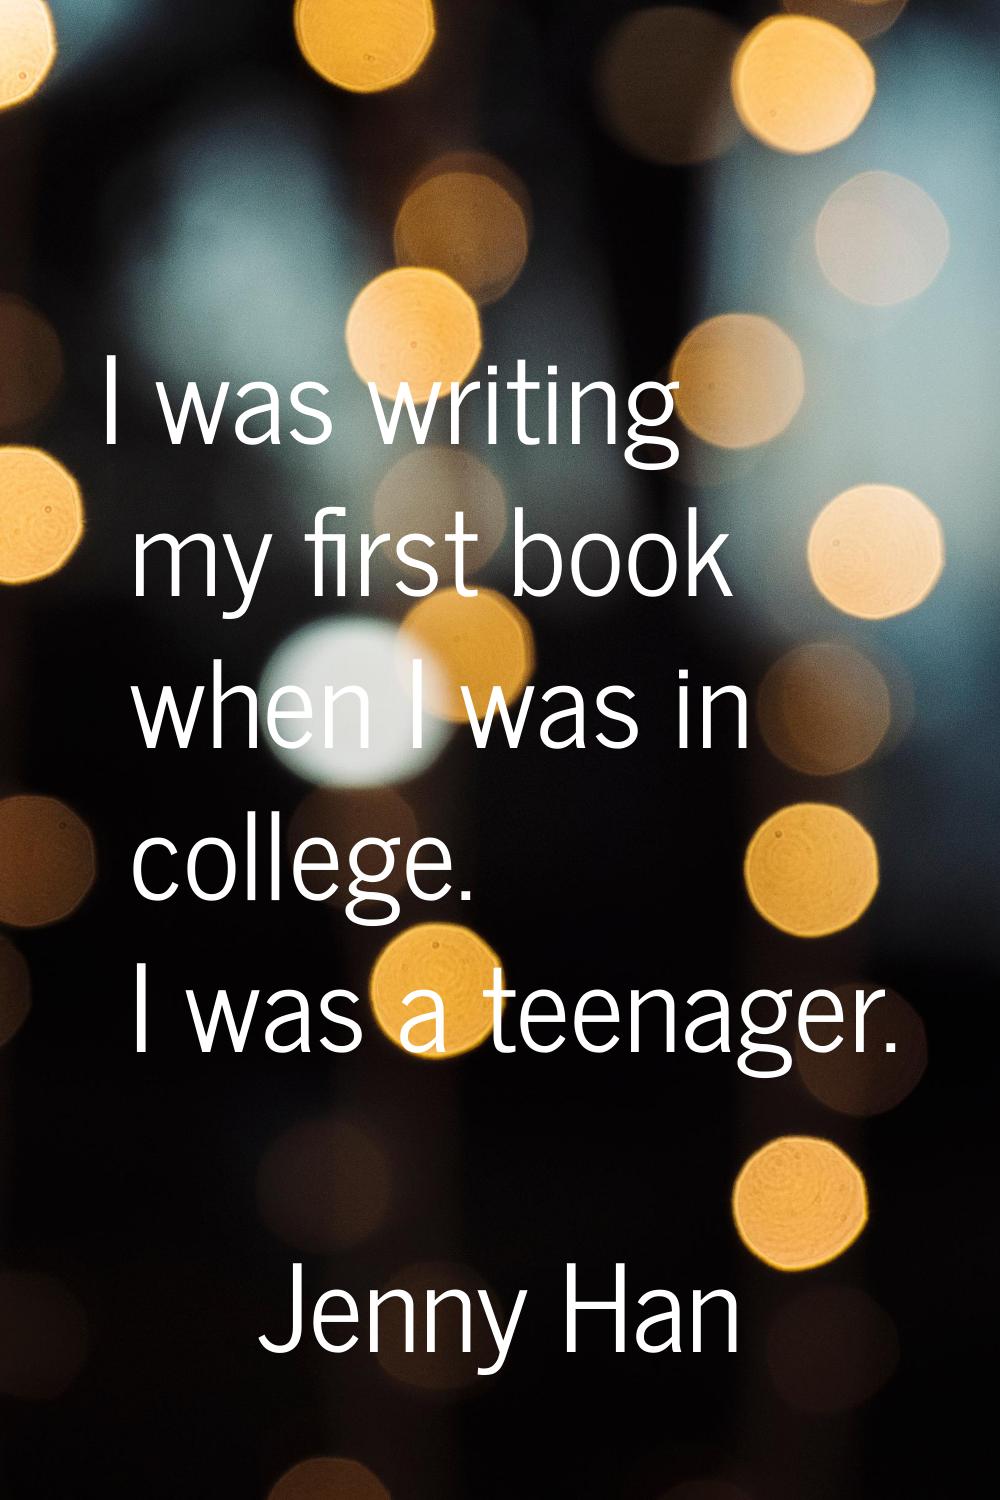 I was writing my first book when I was in college. I was a teenager.